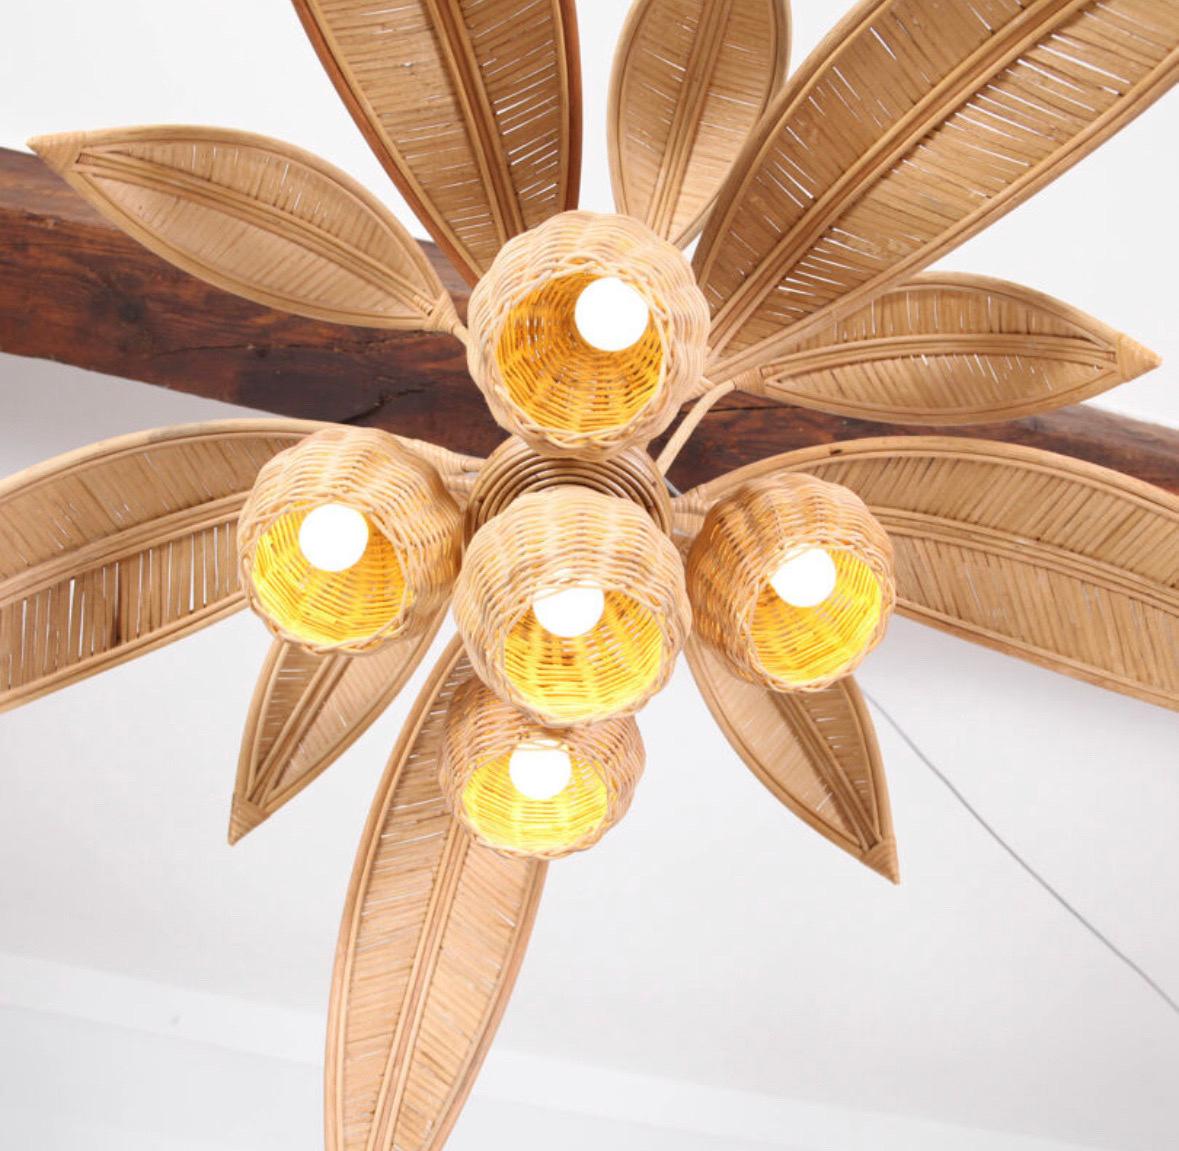 Rattan « coconut tree/palm tree » ceiling light For Sale 1